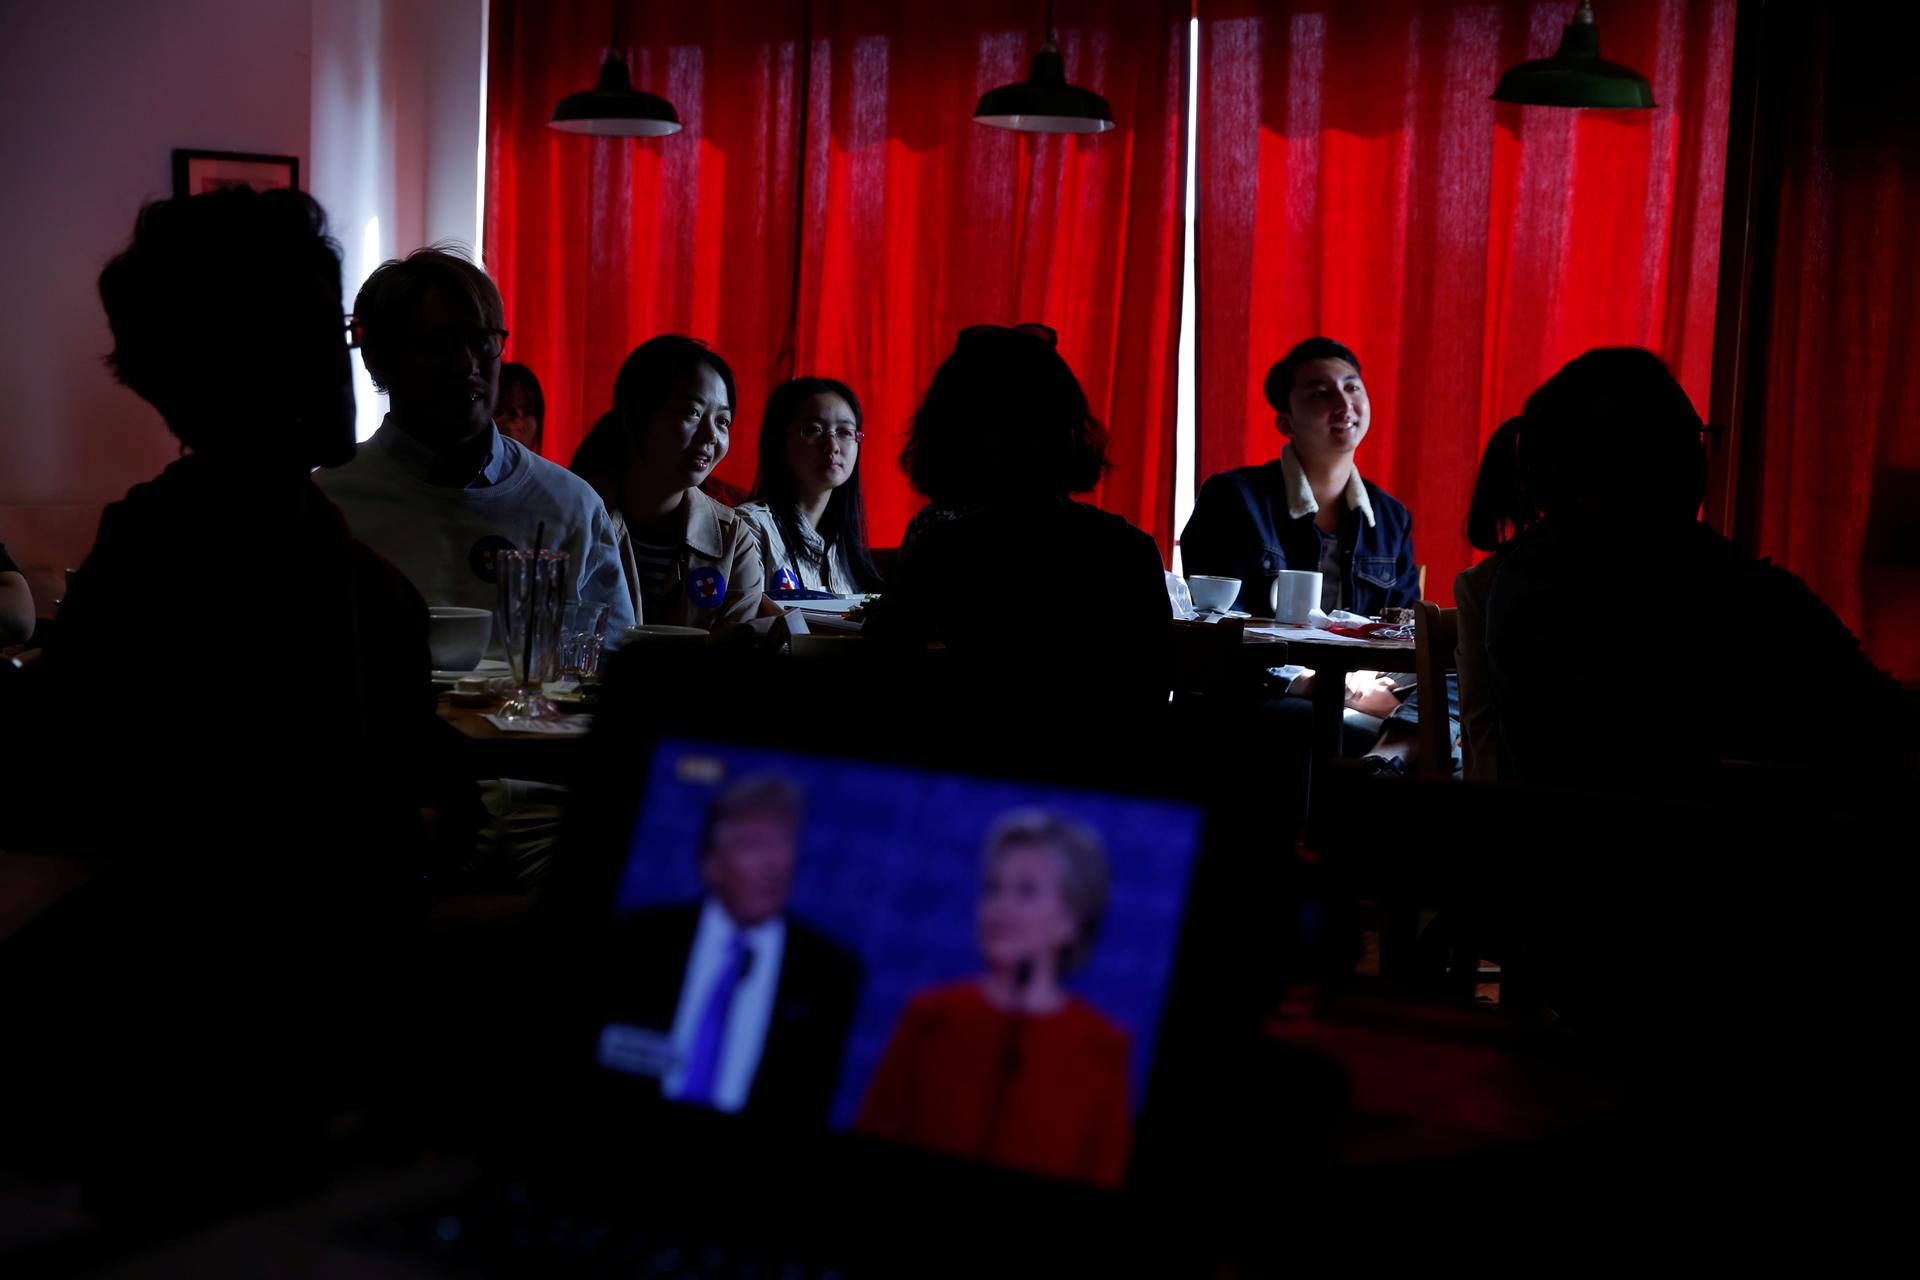 People watch a direct broadcast of the first U.S. presidential debate between Republican U.S. presidential nominee Donald Trump and Democratic U.S. presidential nominee Hillary Clinton at a cafe in Beijing, China on September 27, 2016.